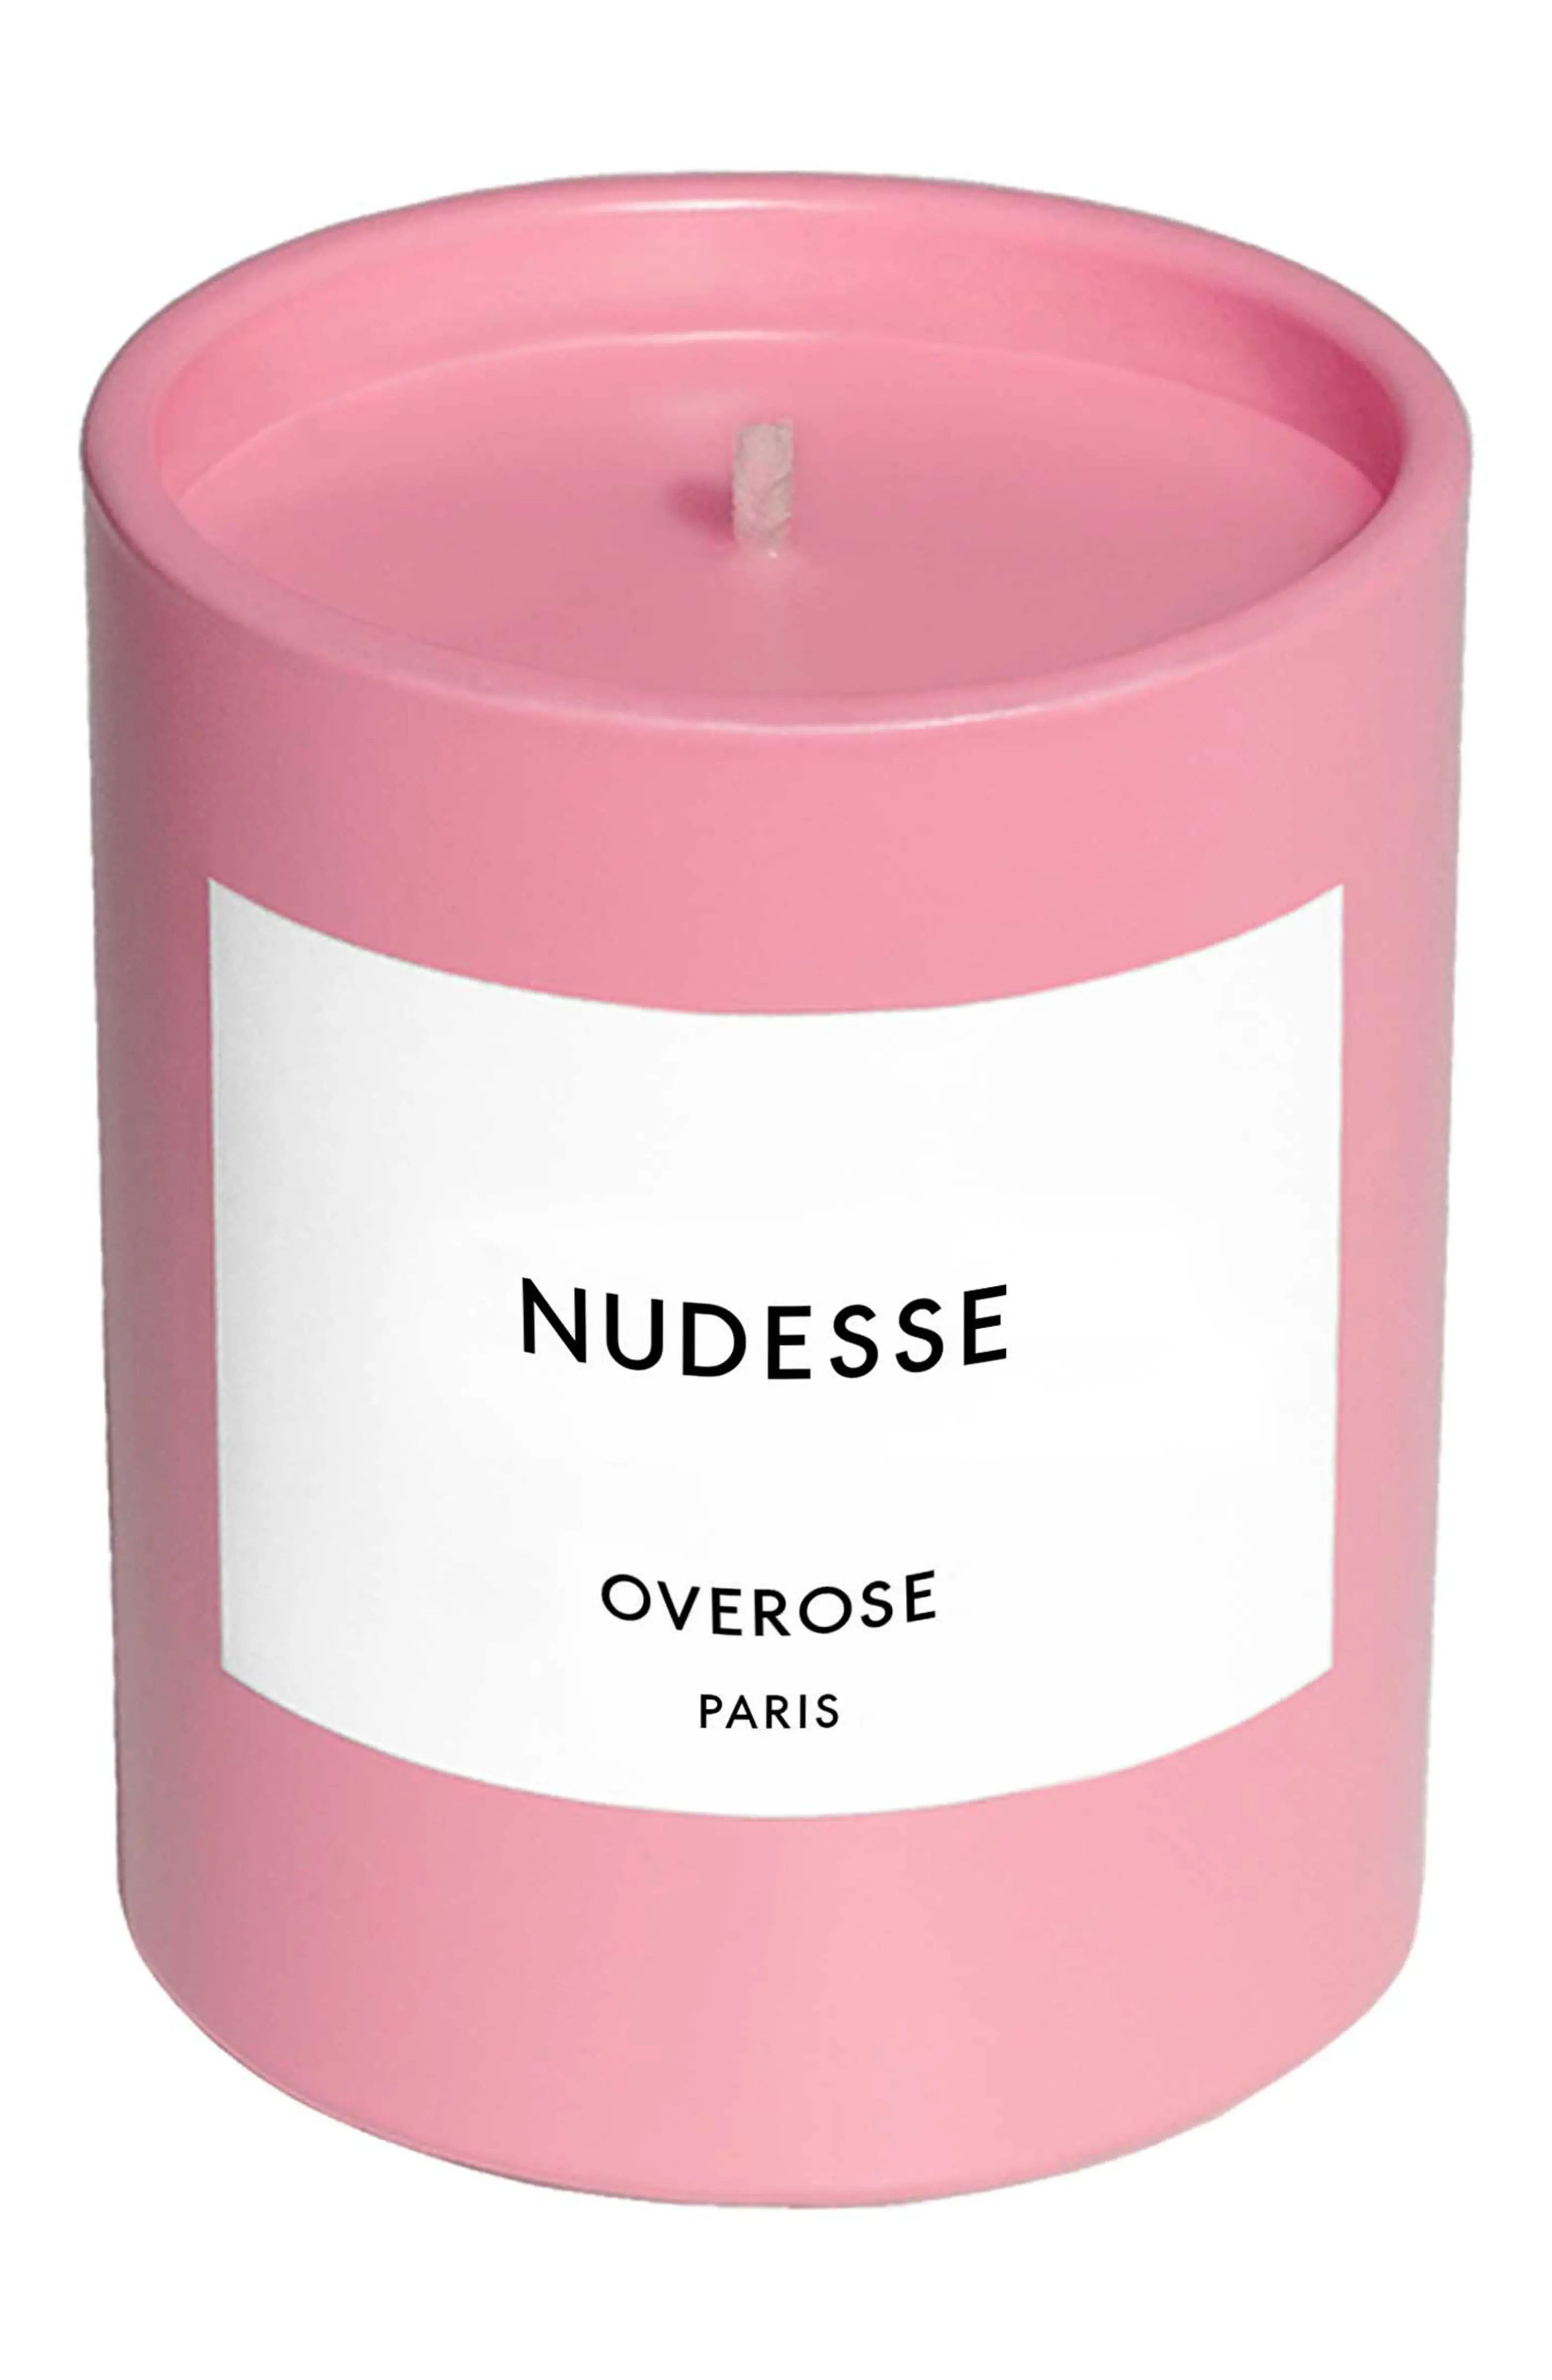 Nudesse Candle | Nordstrom